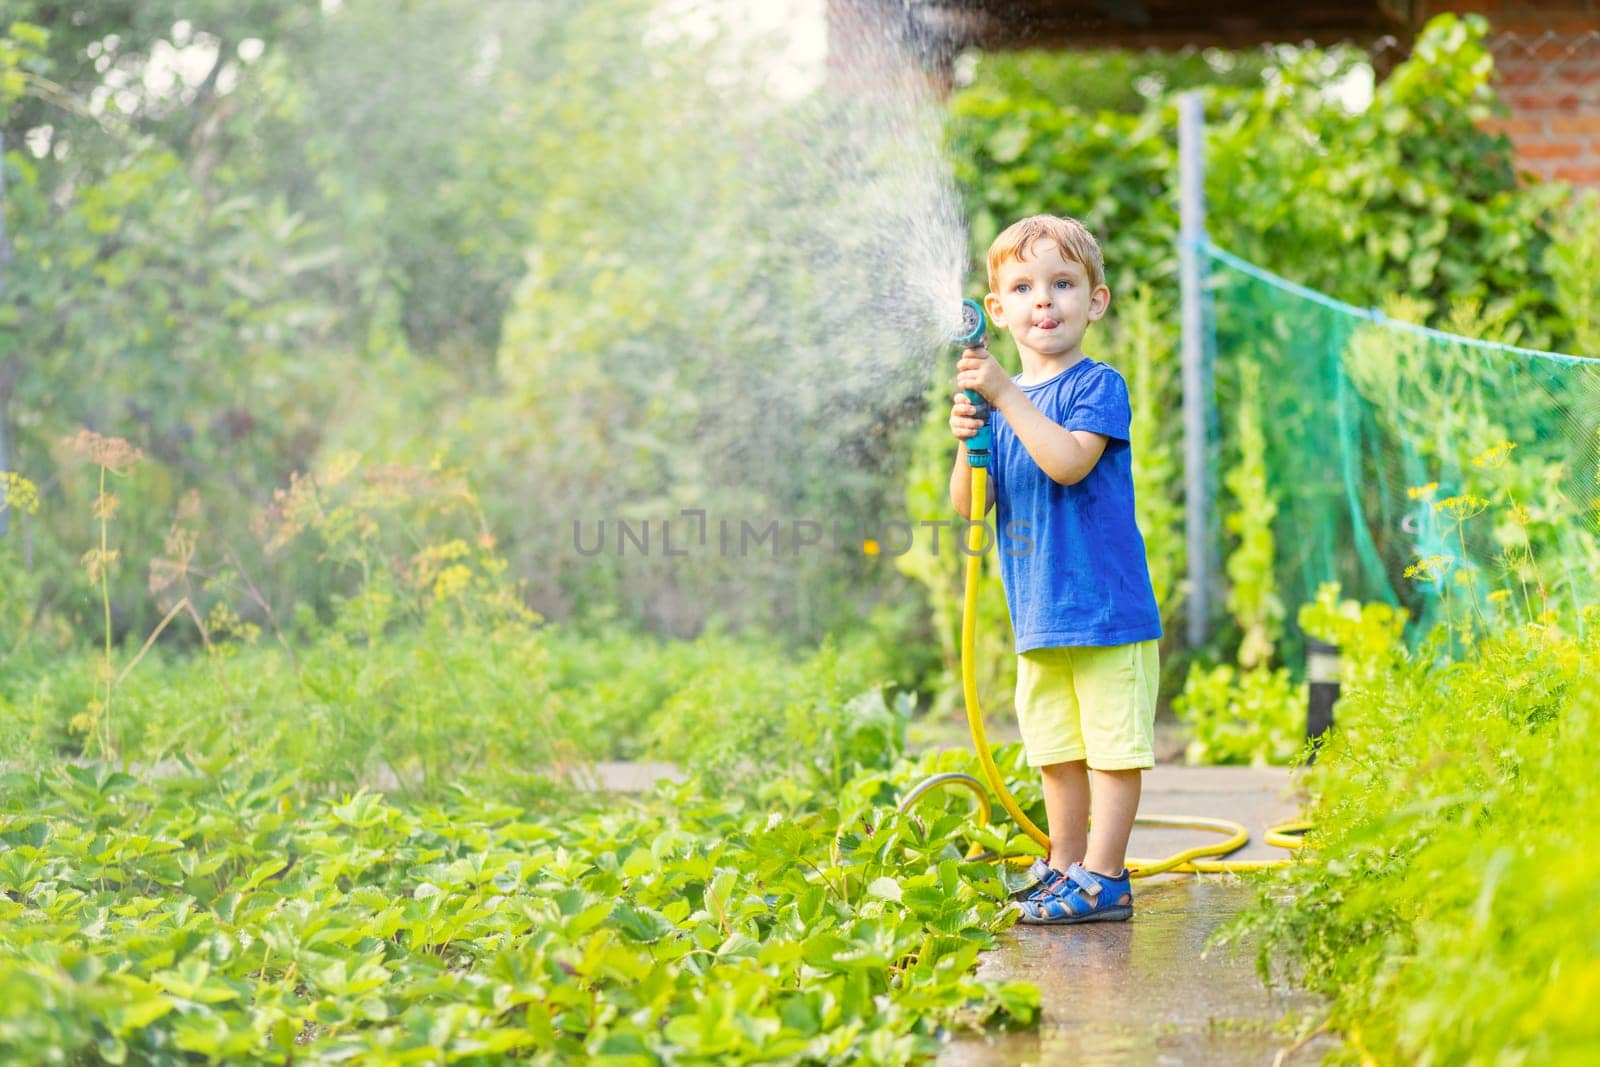 Child watering flowers and plants in garden. Kid with water hose in sunny blooming backyard. Little boy gardening. Children help parents